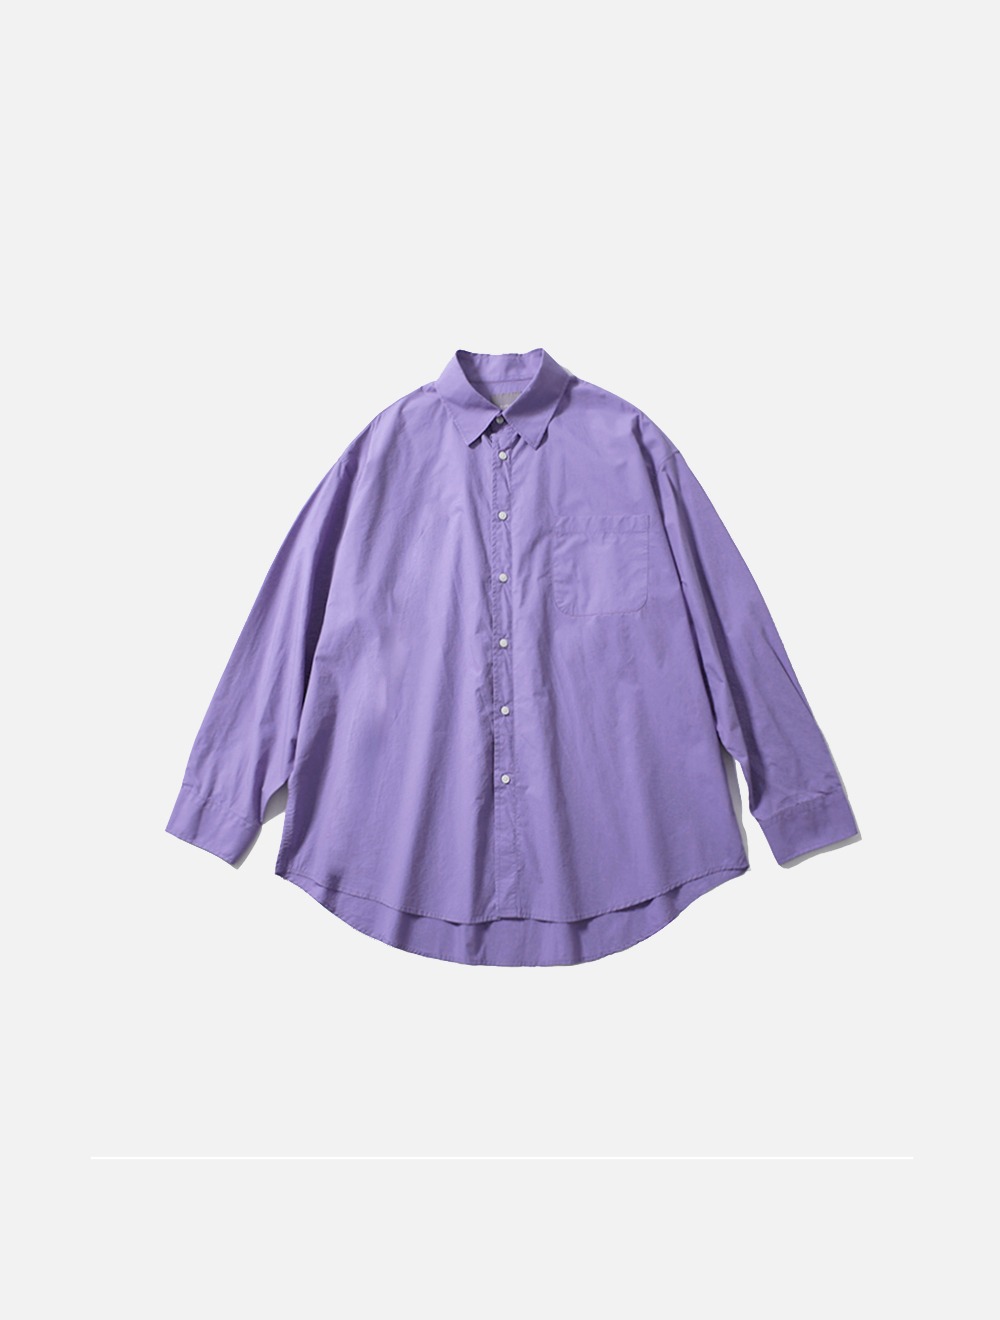 ALL WEATHER OVER SILHOUETTE SHIRT (LAVENDER)